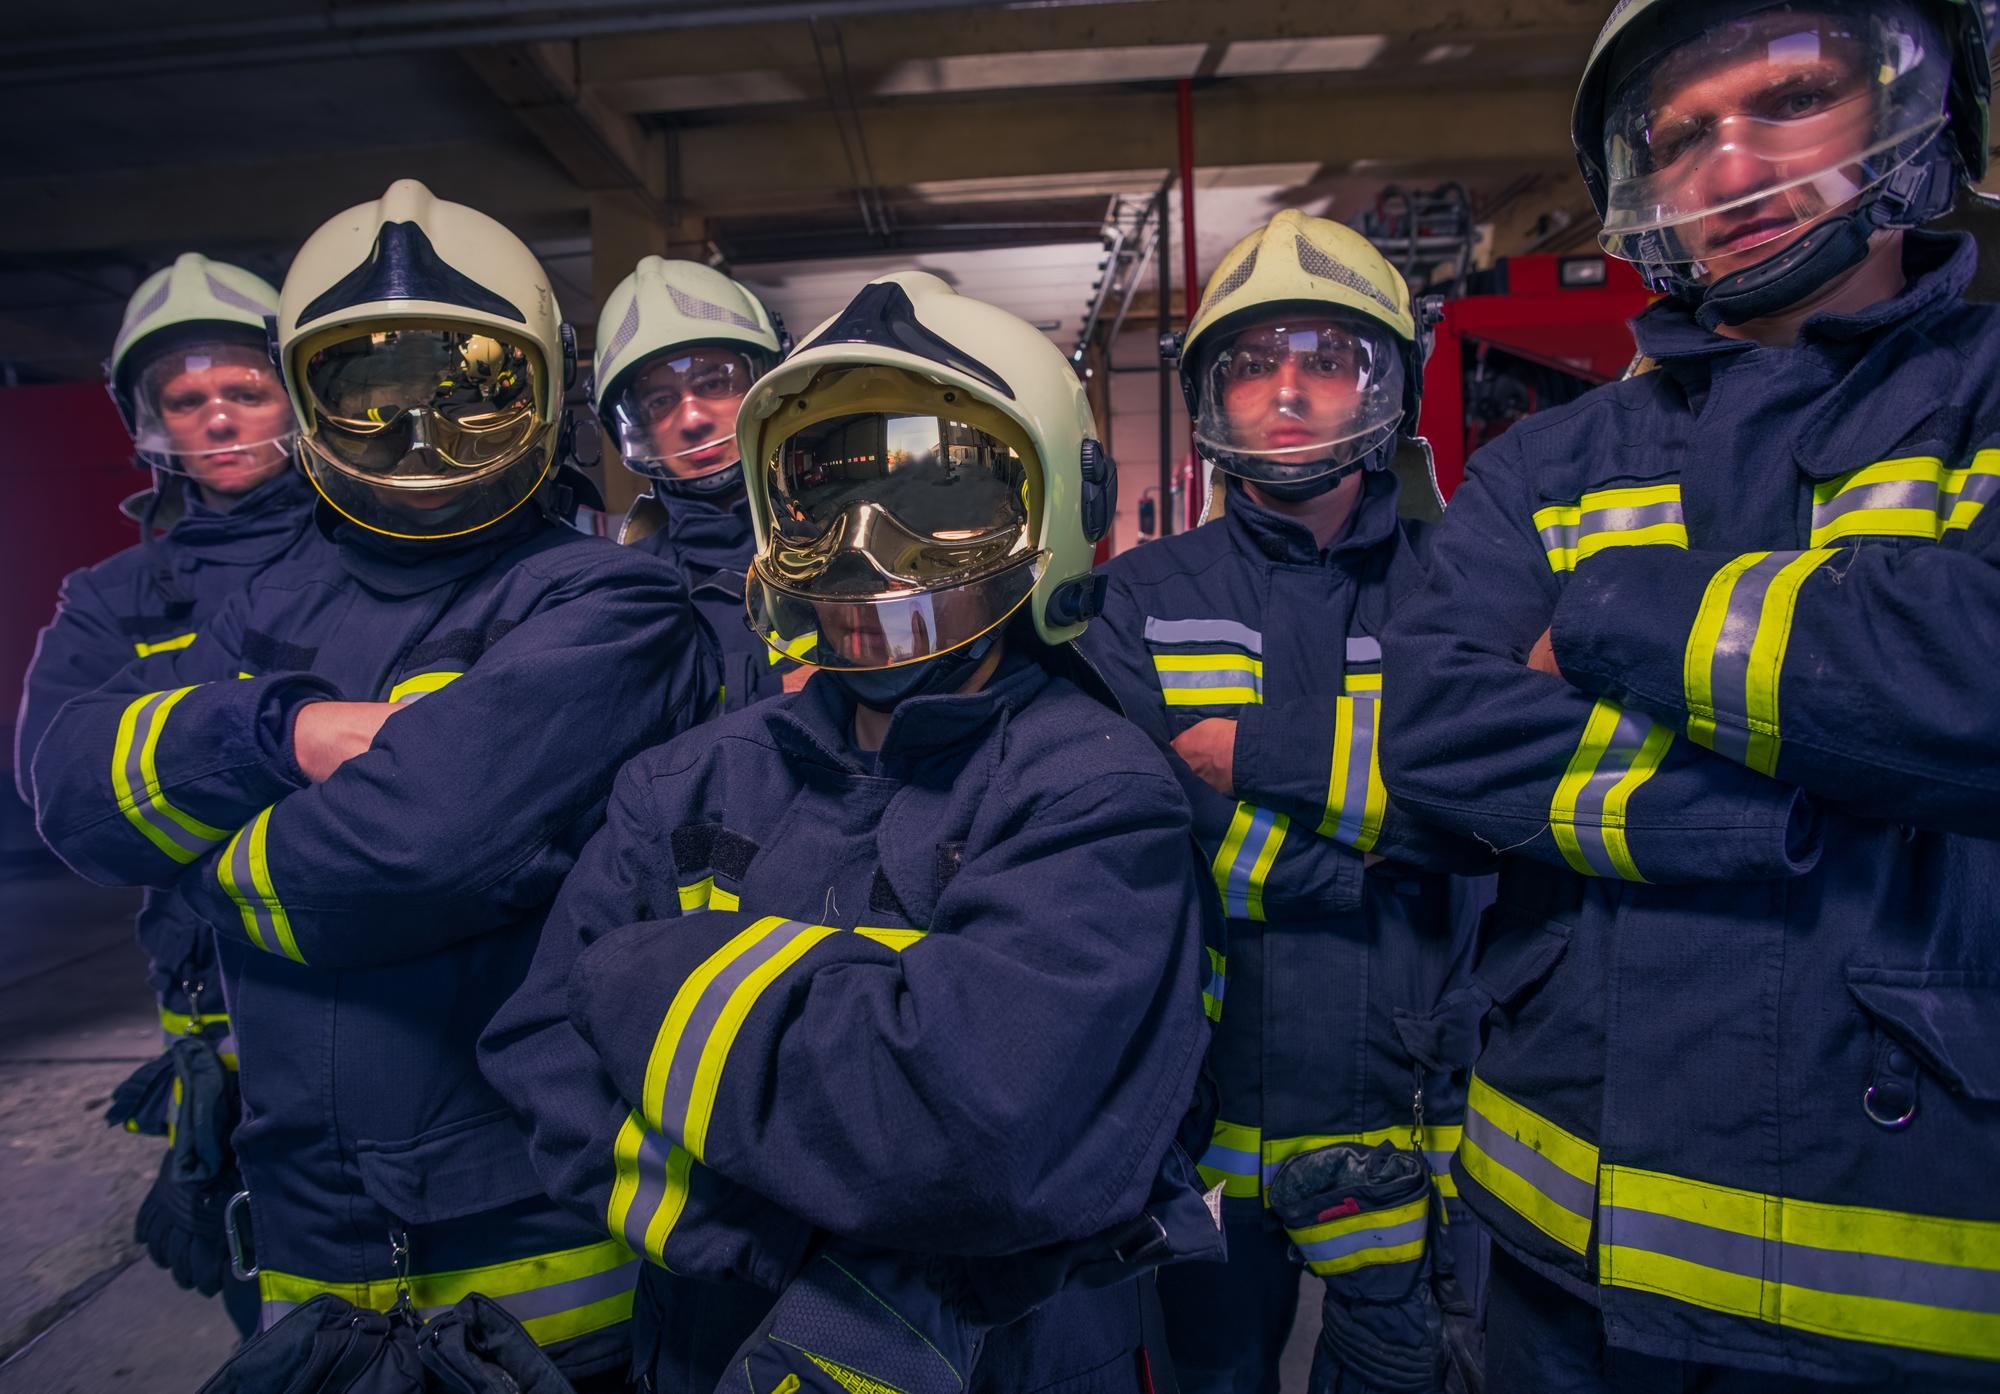 Firefighter turnout gear may protect from heat, but expose skin to